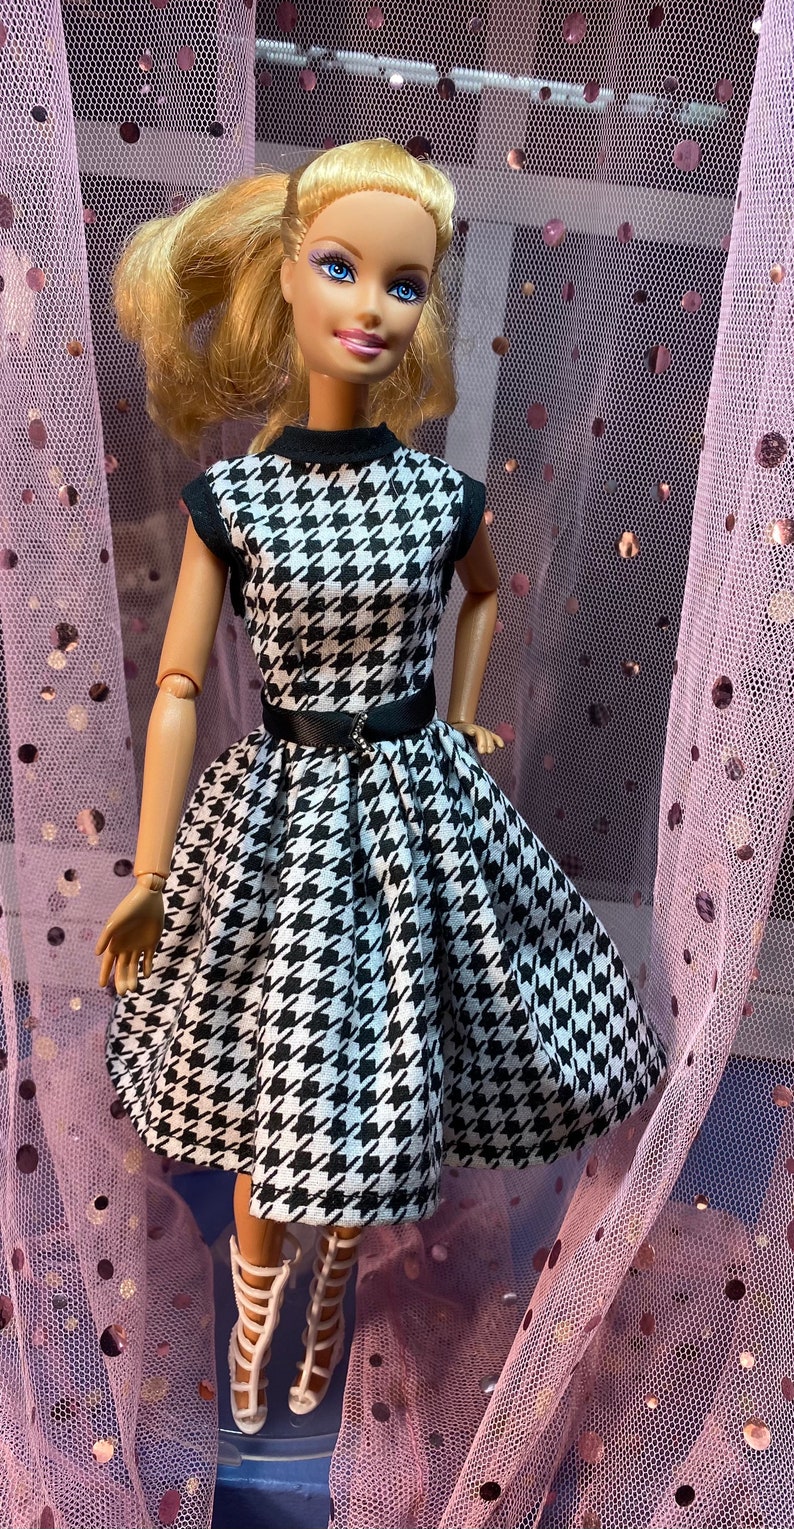 Barbie 1950s inspired Outfit Barbie Retro Style Dress | Etsy